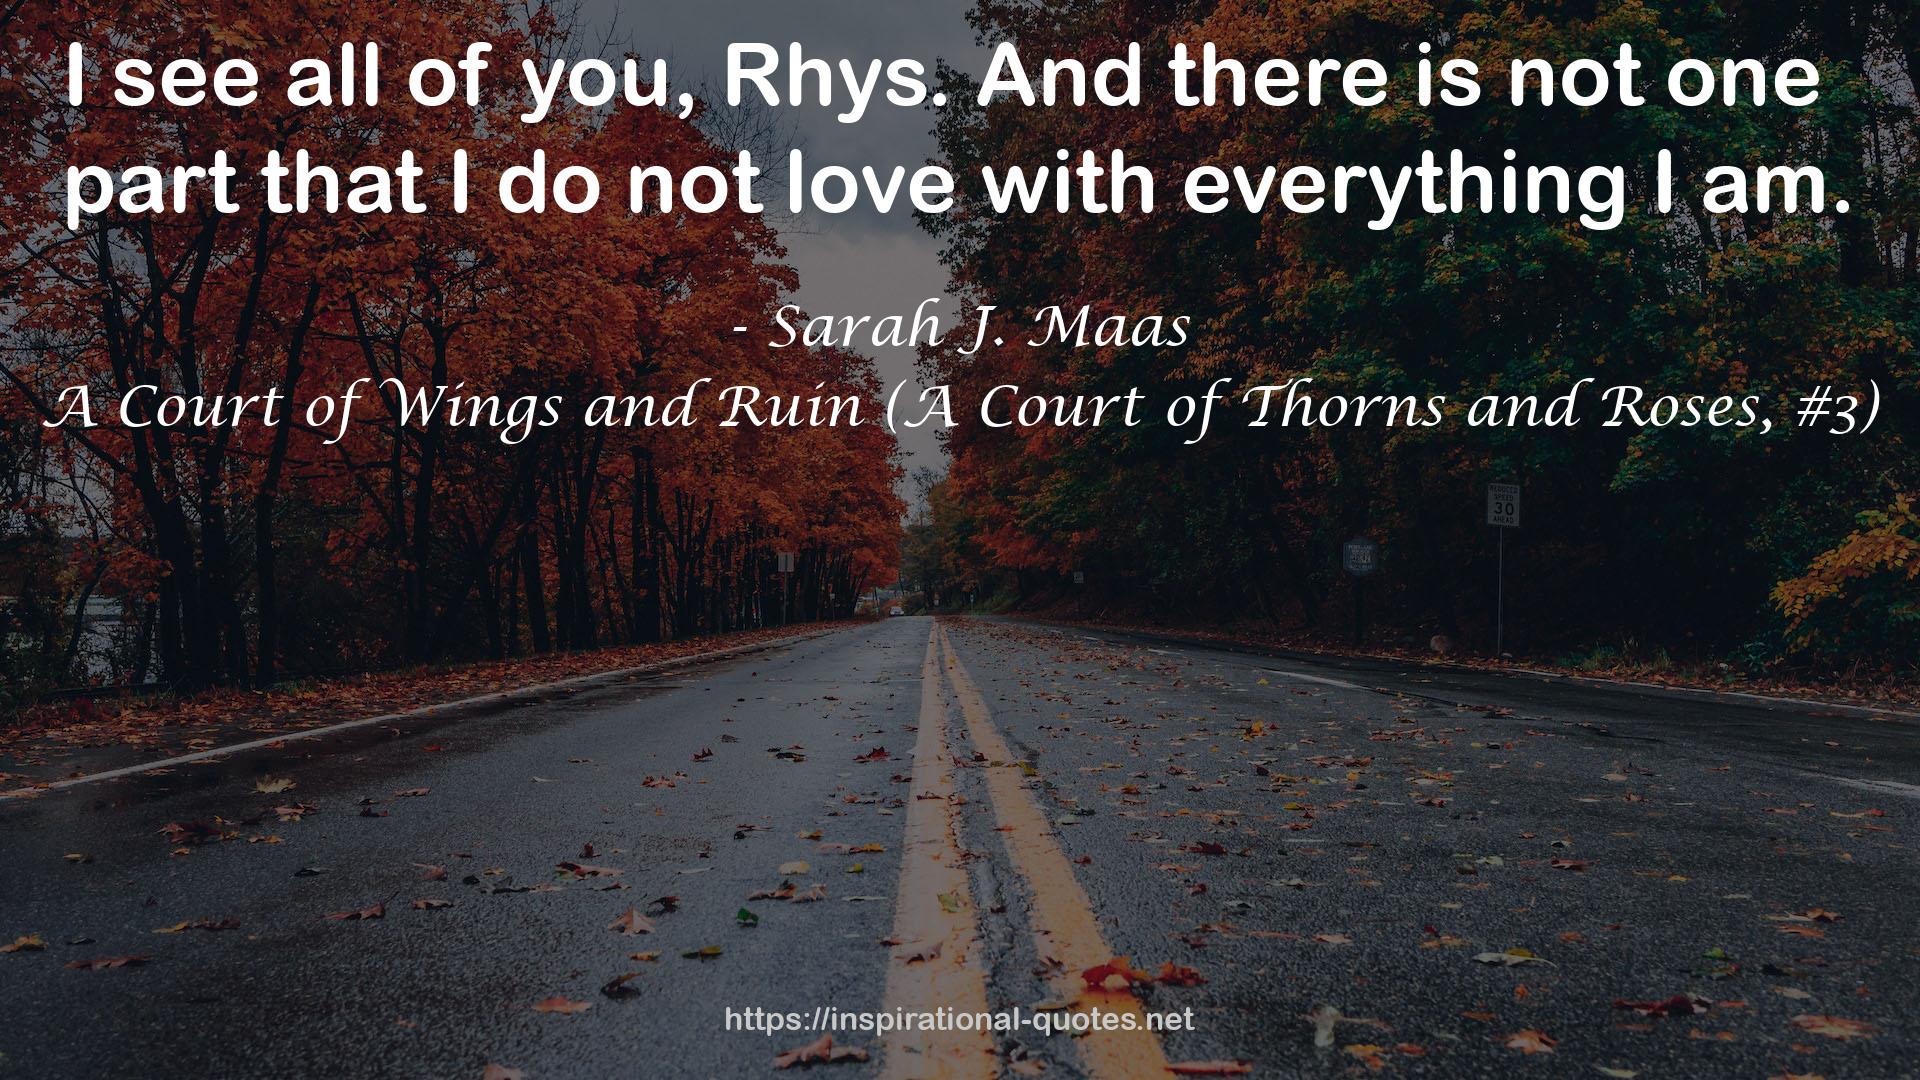 A Court of Wings and Ruin (A Court of Thorns and Roses, #3) QUOTES